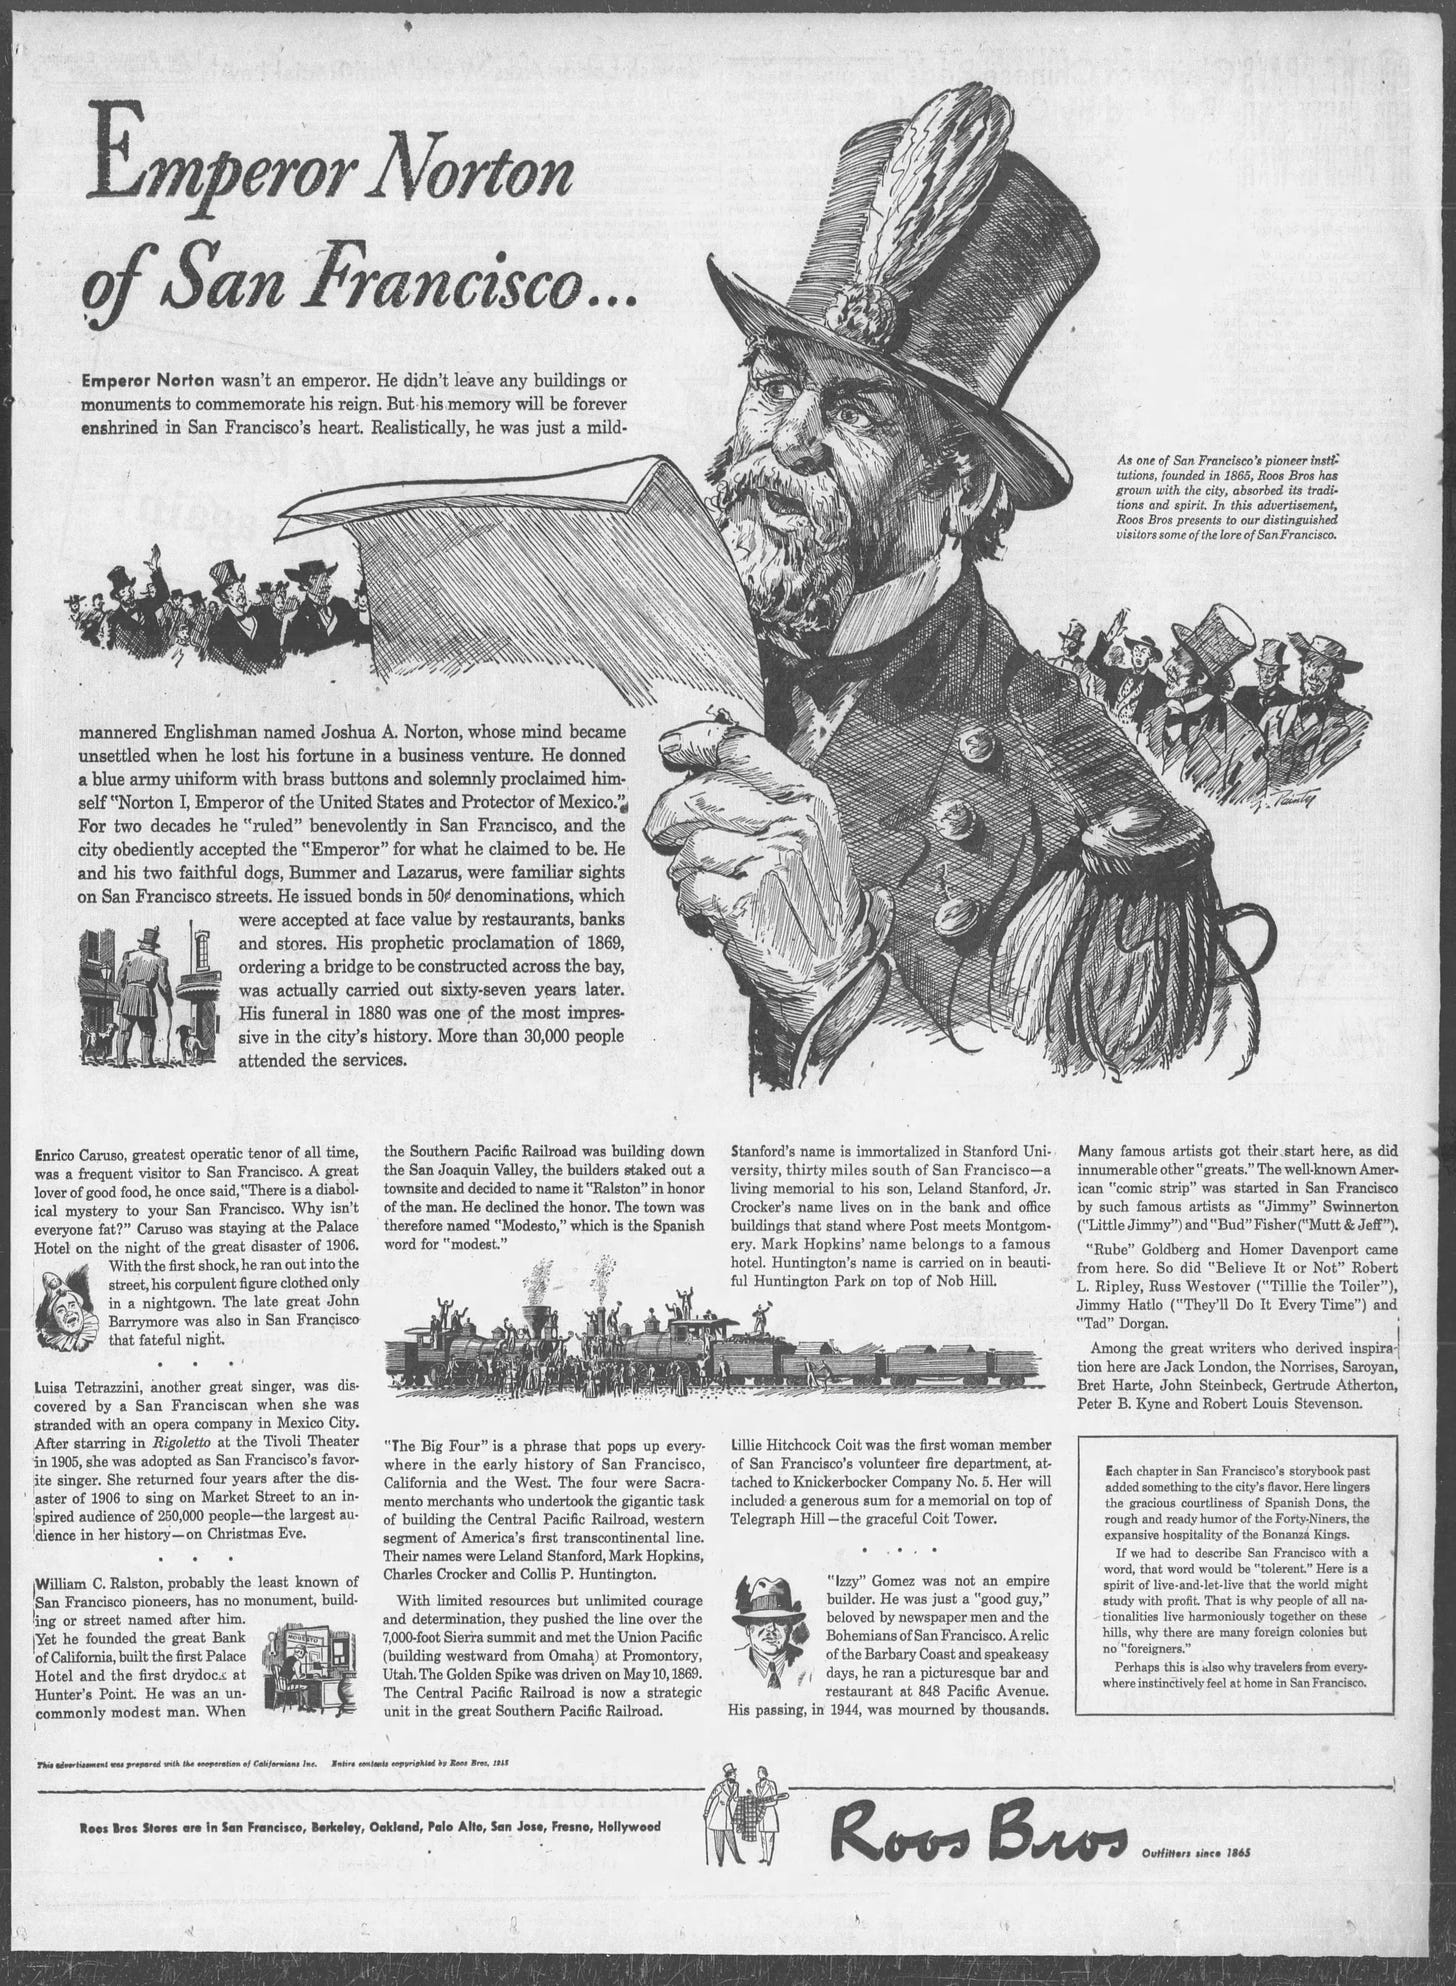 Full page story from the San Francisco Examiner, May 10, 1945. Headline "Emperor Norton of San Francisco". A large illustration dominates the top half of the page and features a middle-aged man wearing a mid 18th century military style uniform with epaulets and a tall hat with plumed feather, and stiff white collar. Emperor Norton, with a beard, is holding a large paper from which he appears to be reading, while in the distance, other men wearing top hats of the era listen and respond with enthusiasm. The article tells the story of Emperor Norton, a mythical figure in San Francisco history.